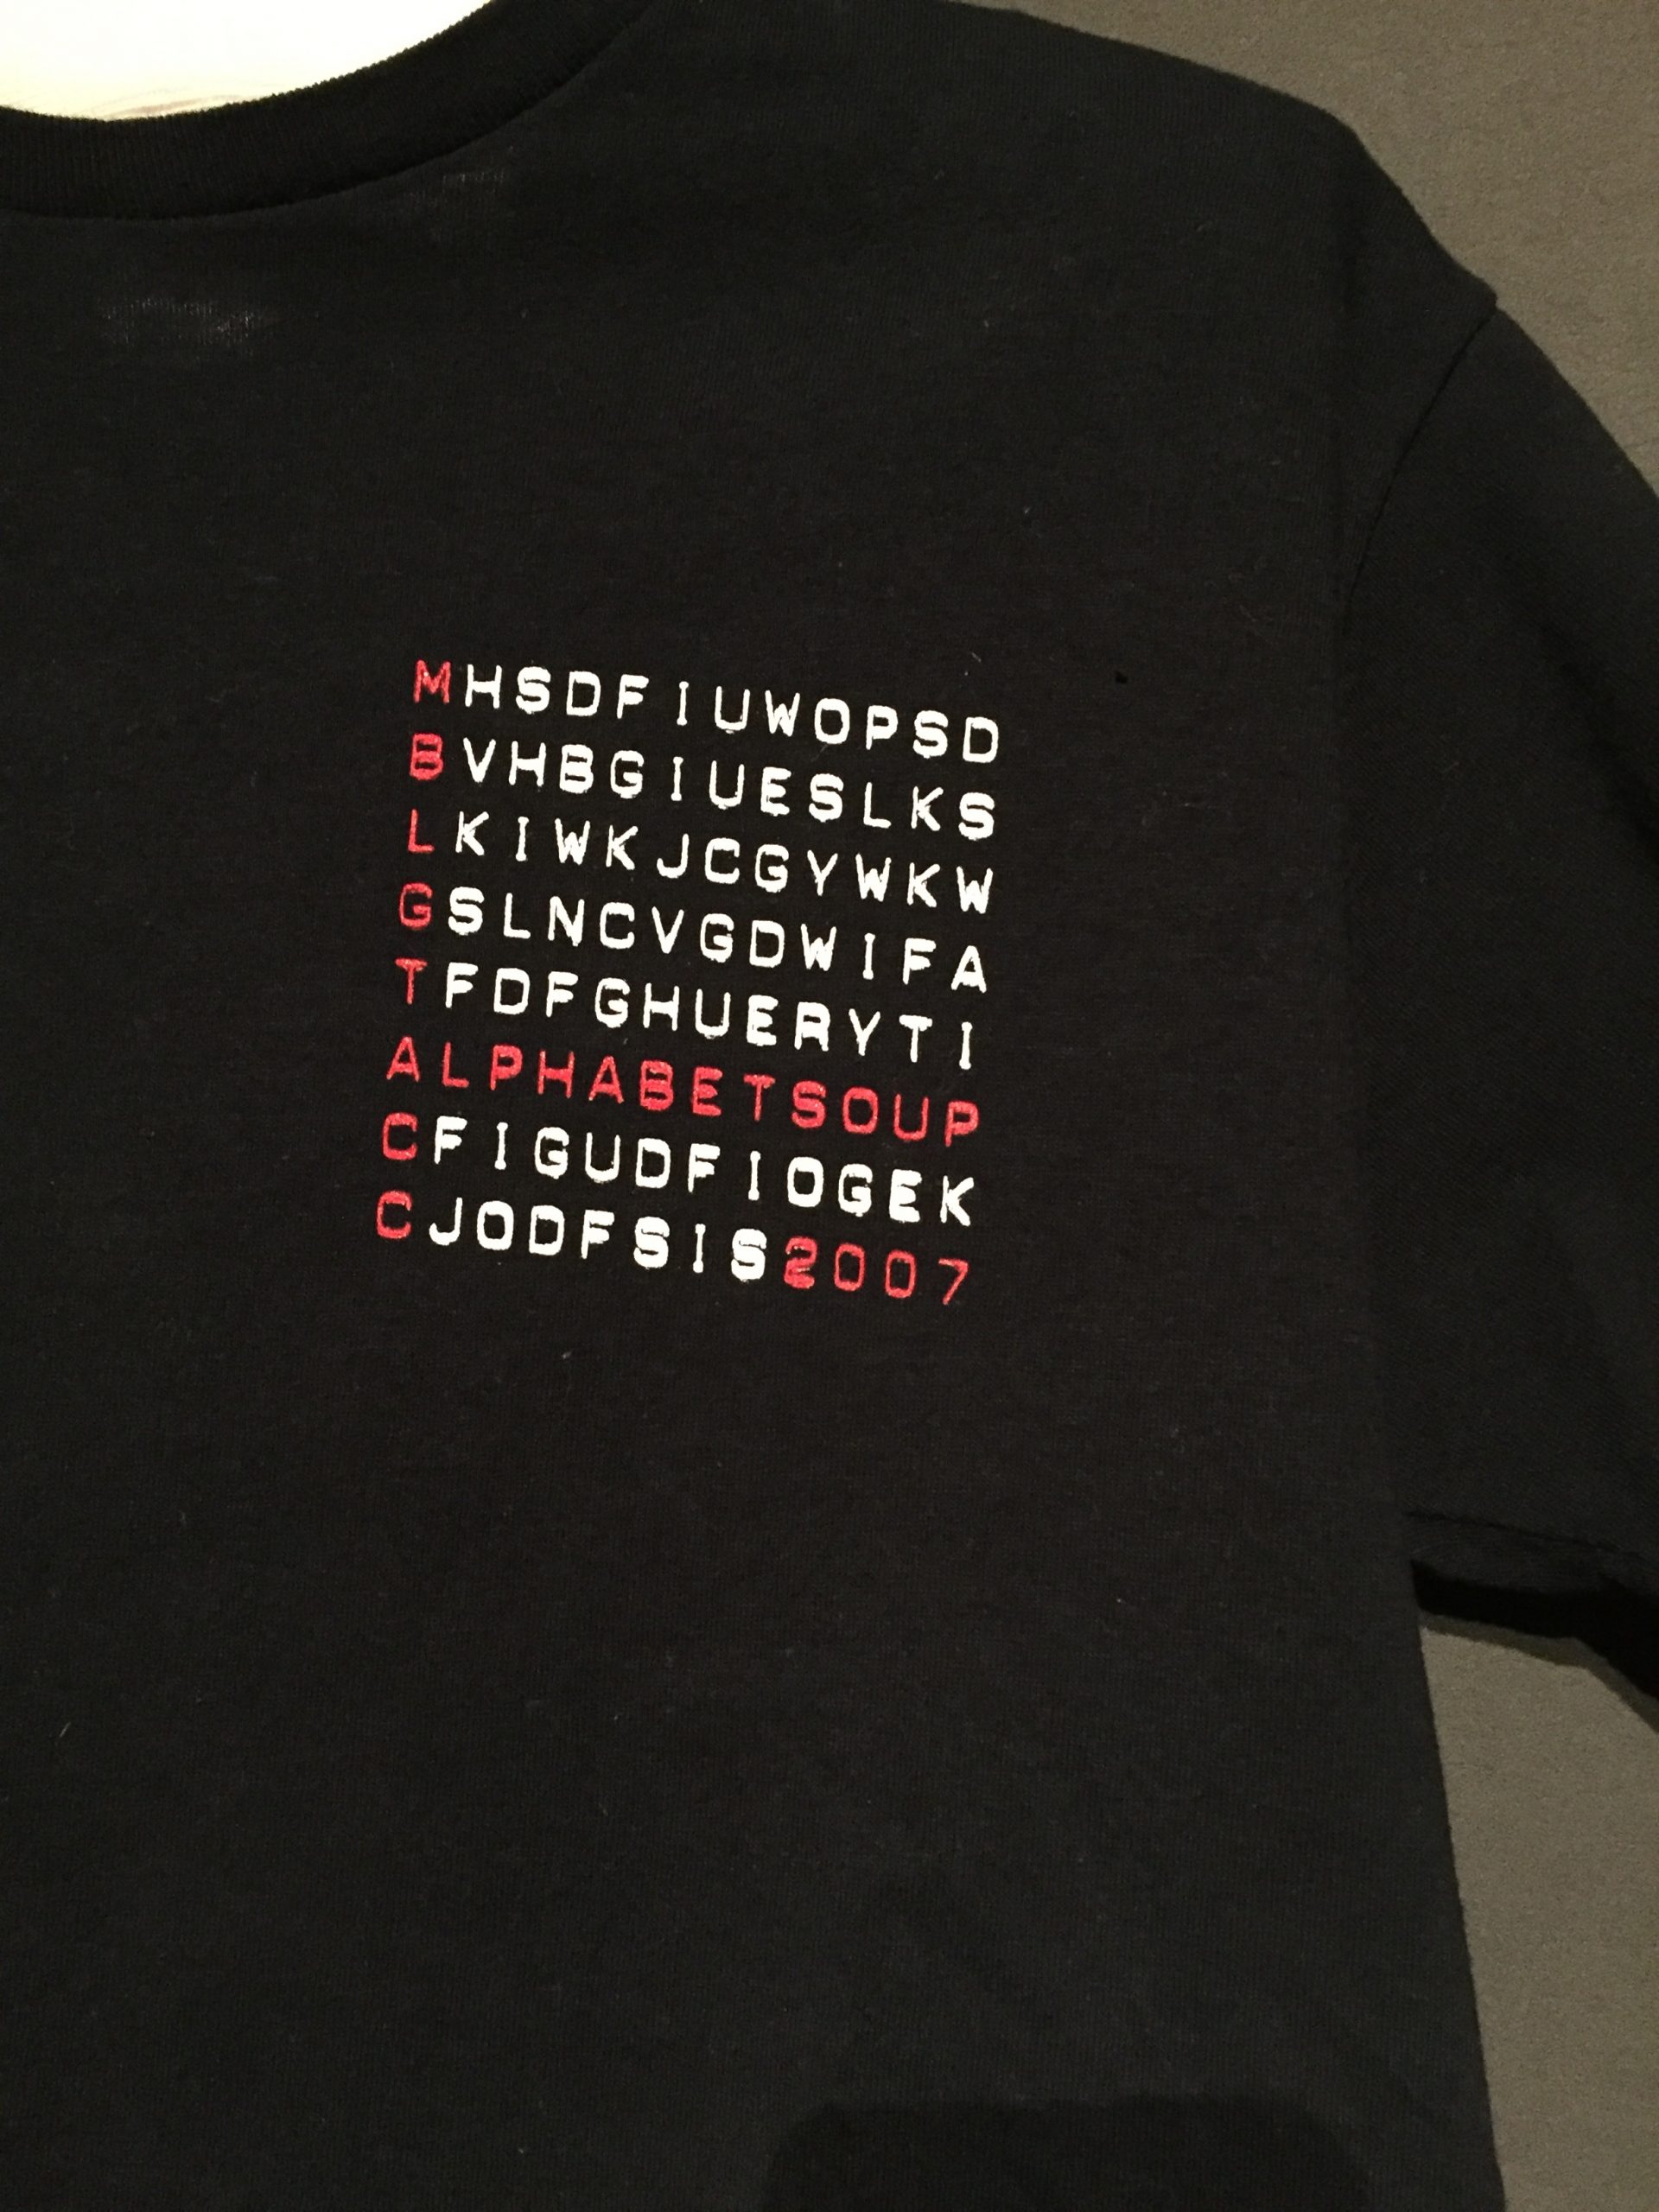 Close-up of black short sleeve t-shirt with red and white text reading: "MBLGTACC Alphabet Soup 2007"